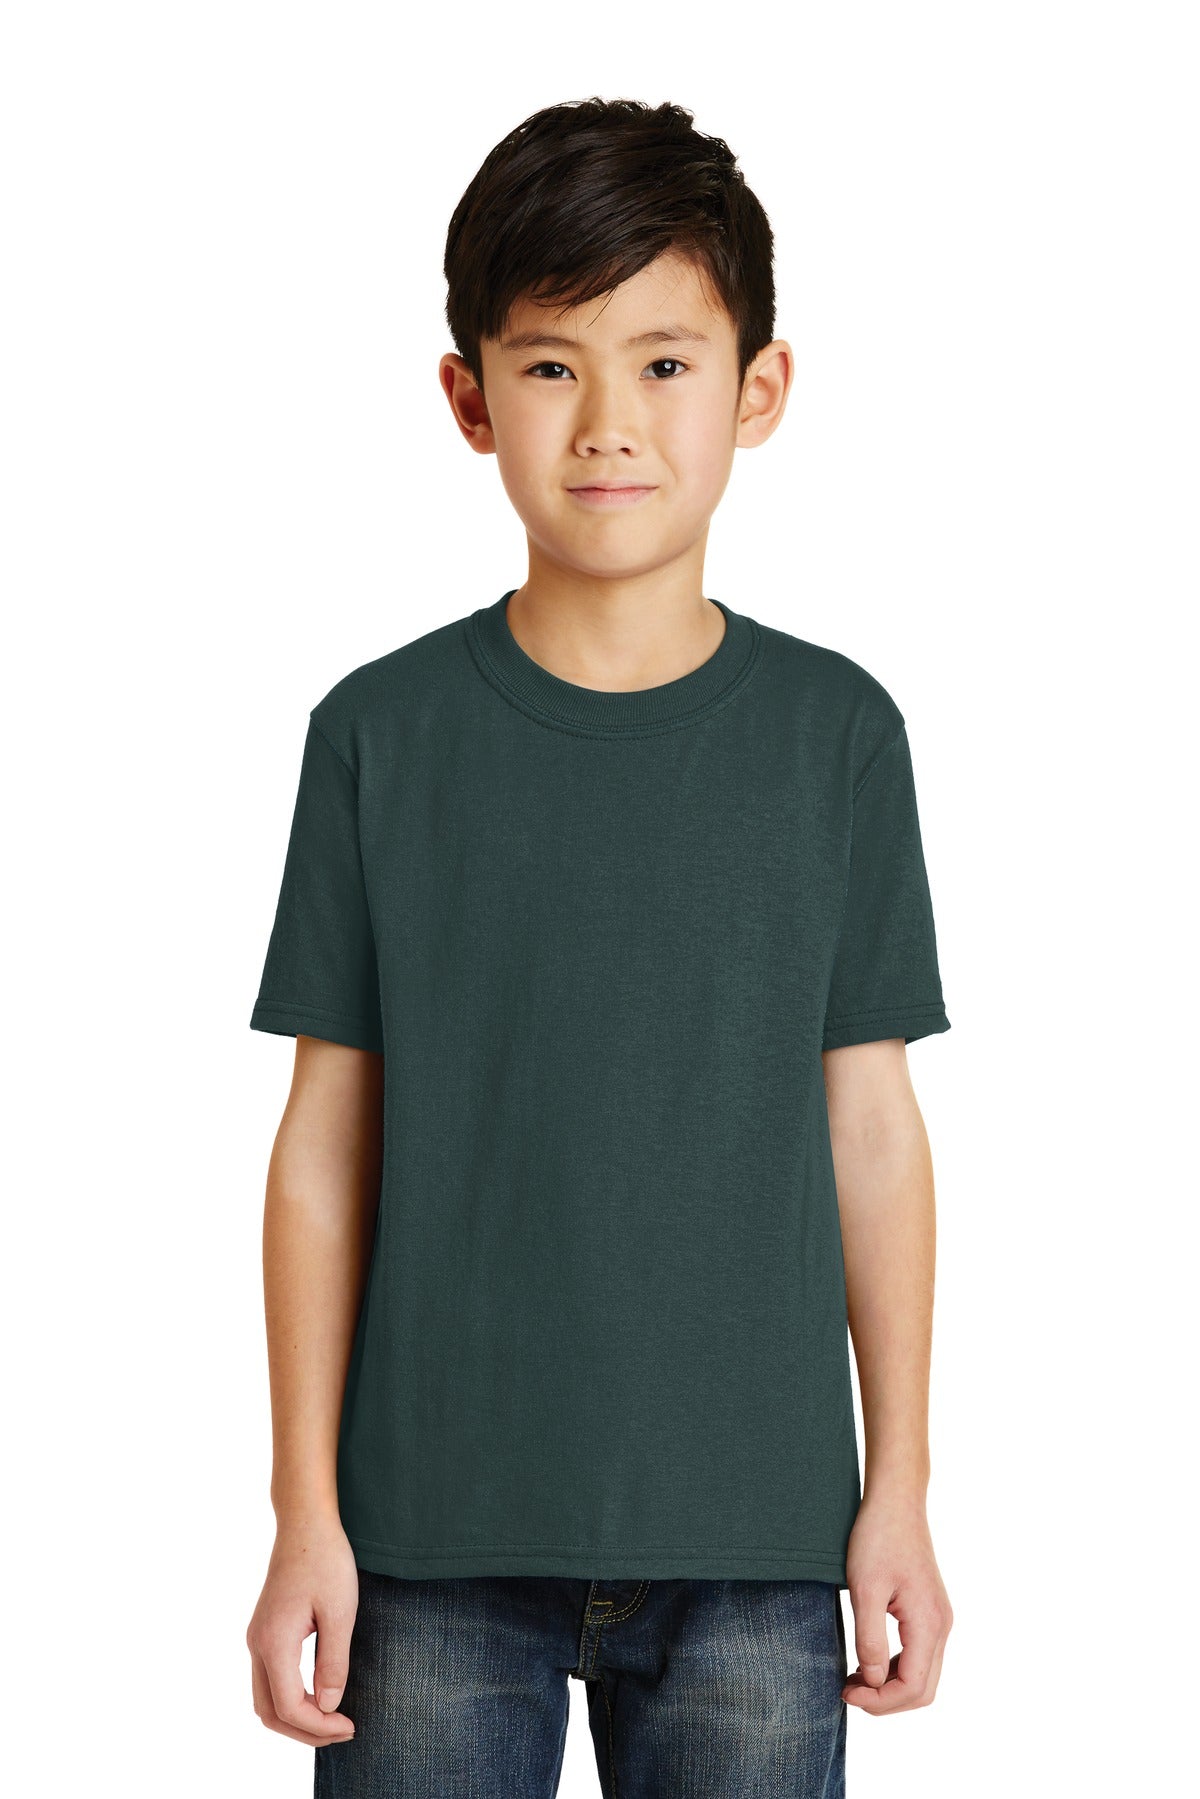 Port & Company?- Youth Core Blend Tee.  PC55Y